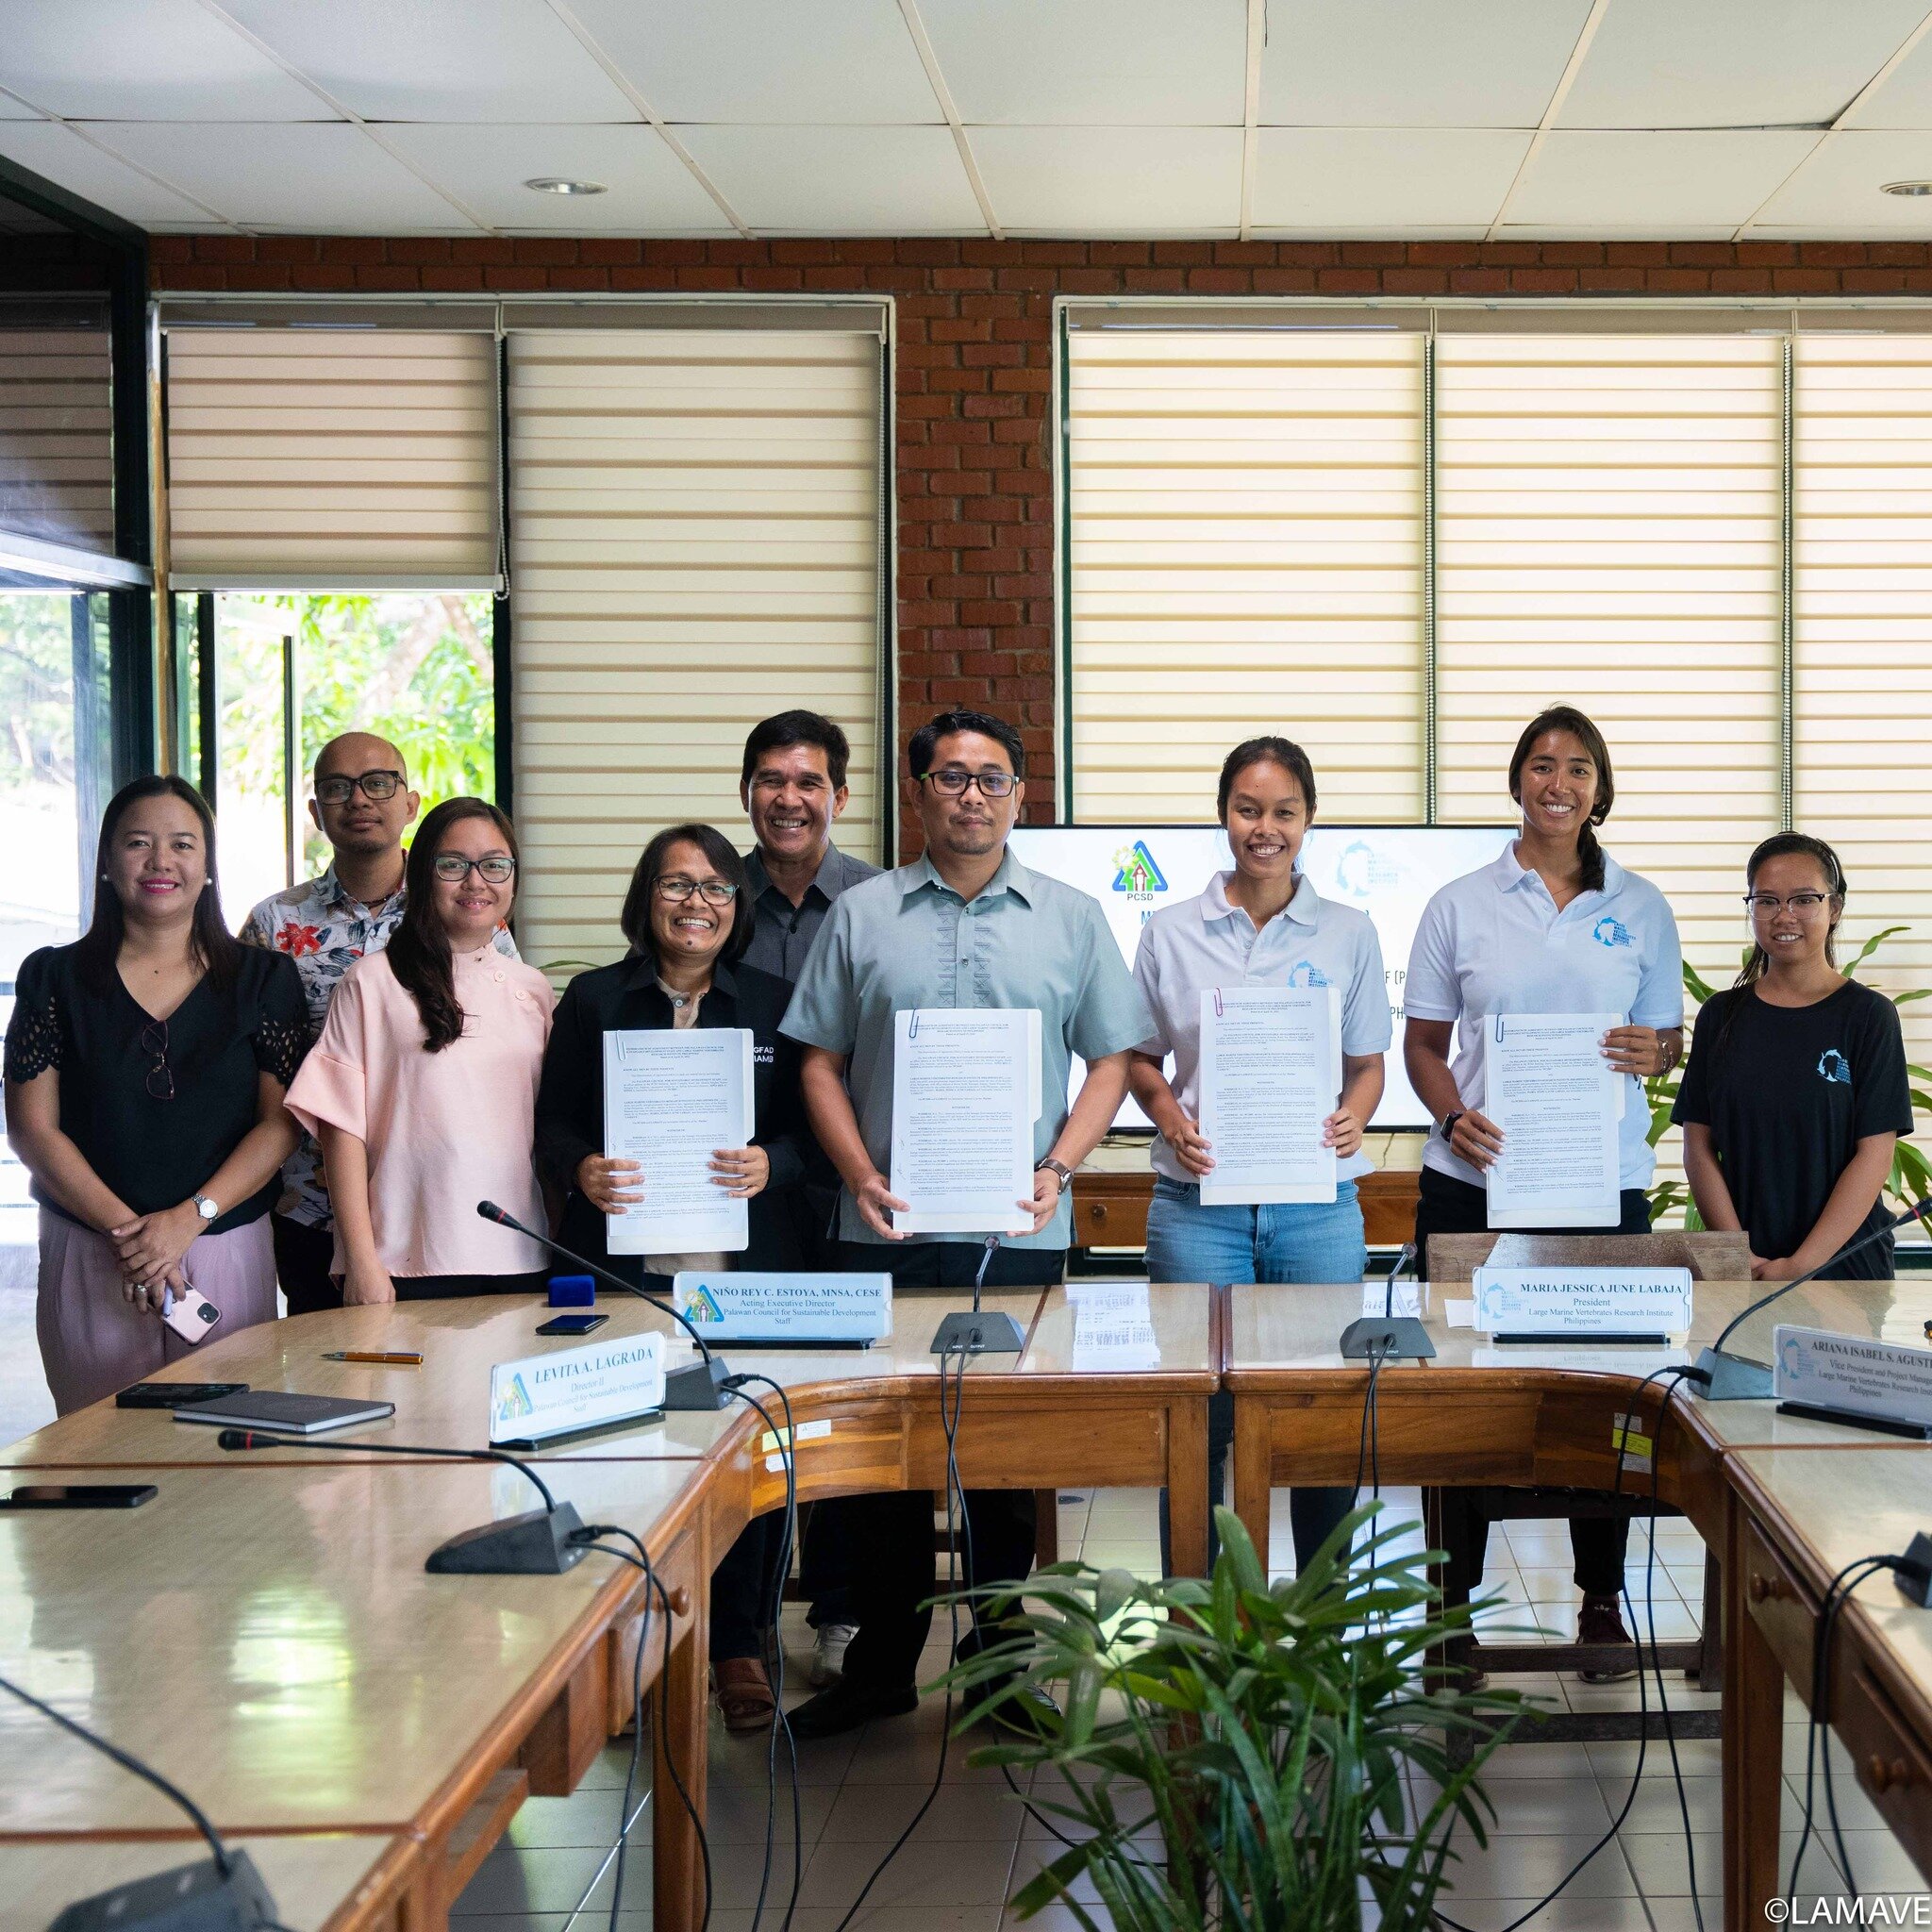 LAMAVE signs a memorandum of agreement (MOA) with the Palawan Council for Sustainable Development Staff to implement the PCSDS-LAMAVE Collaborative Project to Enhance Marine Megafauna Knowledge and Conservation in Palawan and Southeast Asia. 

This p